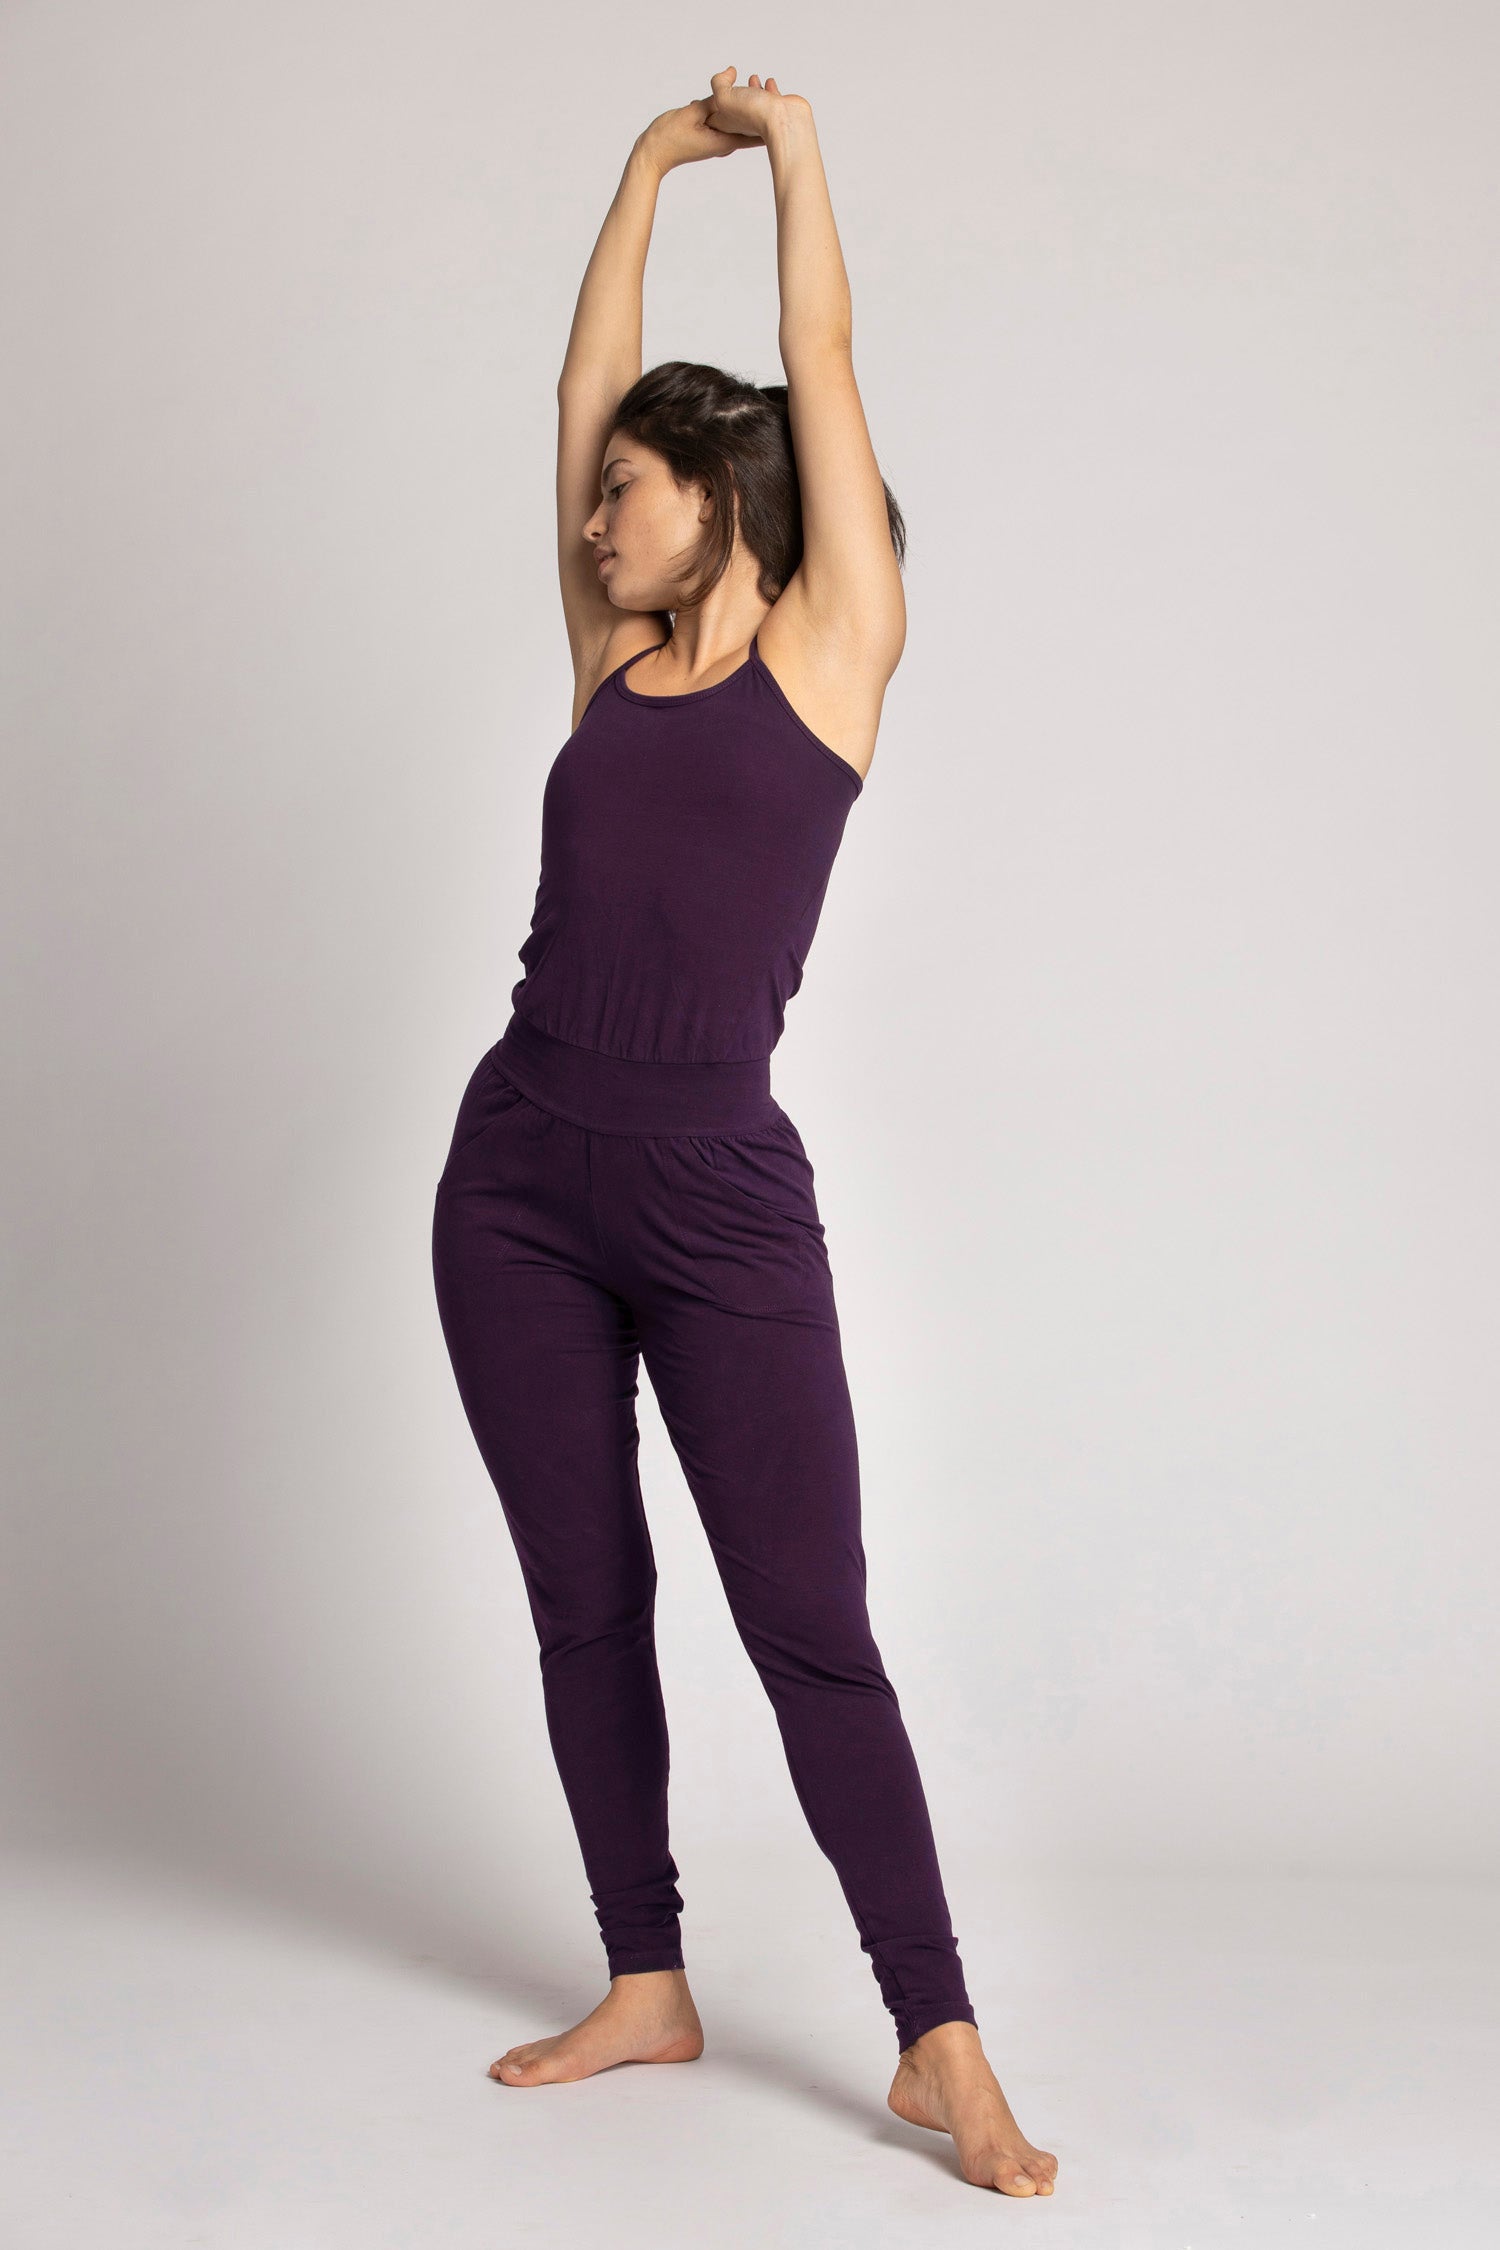 High Waisted Yoga Yoga Jumpsuit For Women Stretchy, Comfortable, And Ideal  For Running, Fitness, Hip Lifting, Workout, Gym, Lifting Durable Nylon  Material Perfect For Summer And Outdoor Activities From Lindaswimsuit,  $22.22